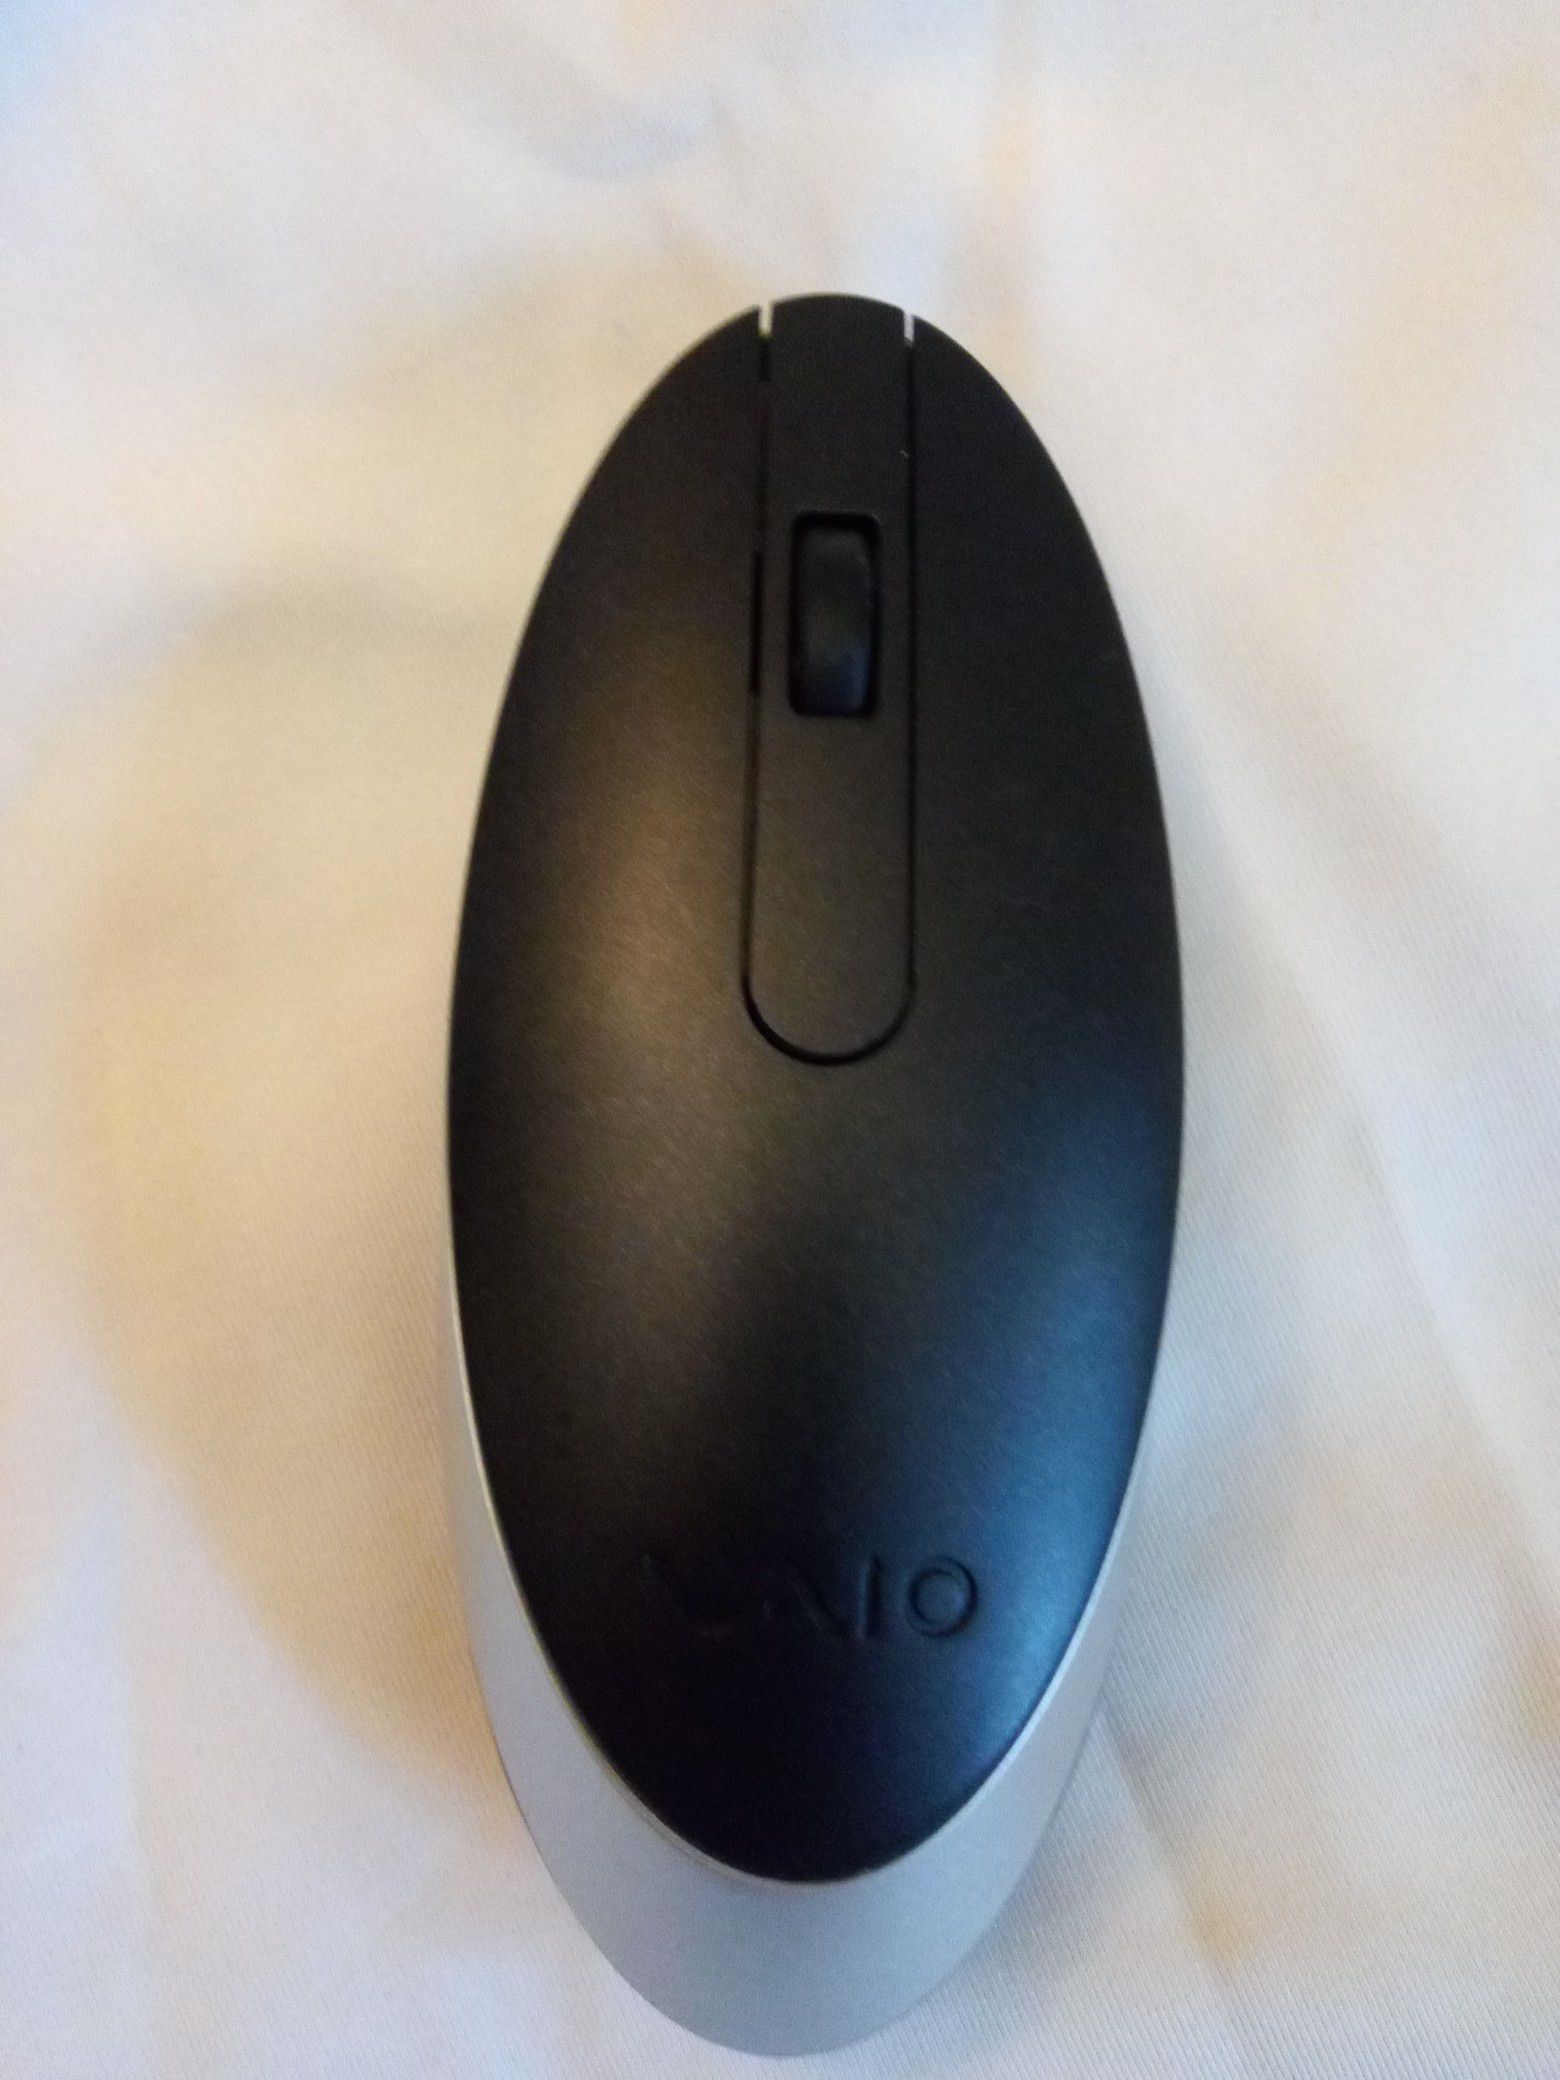 SONY MOUSE WIRELESS